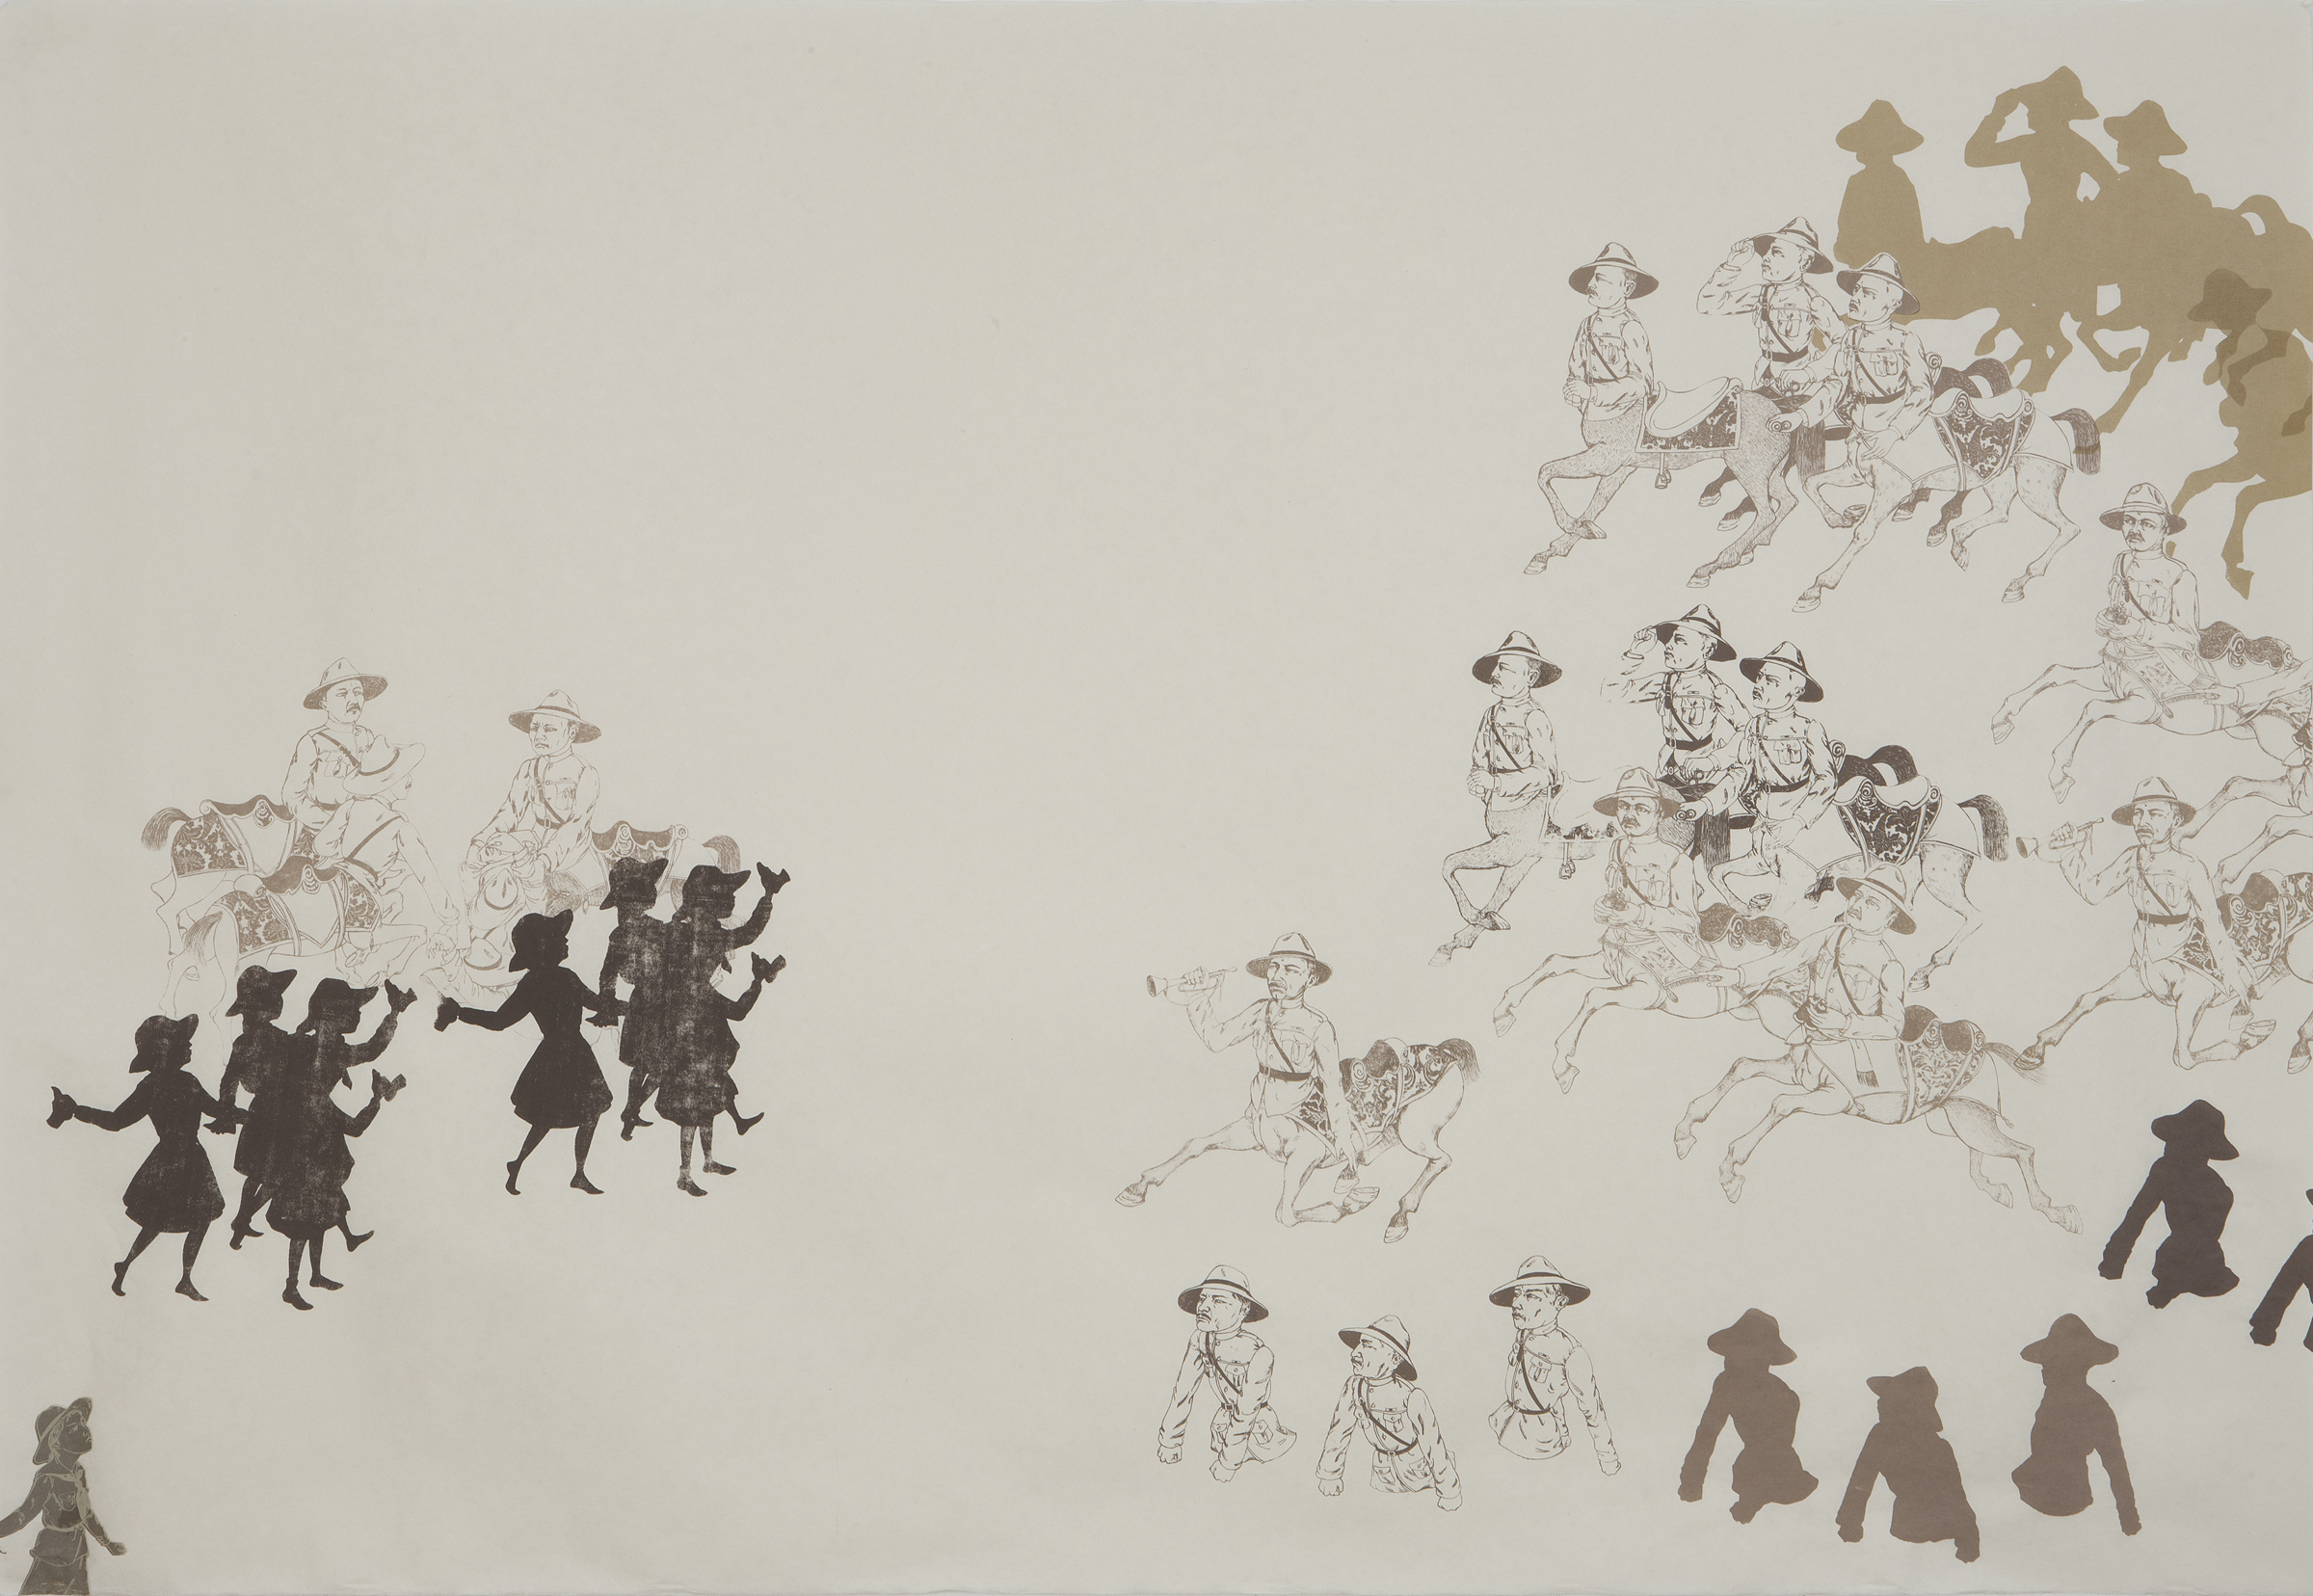   Scouts, Centaurs And Half-Men About To Skirmish , 2011 Five-color unique silk screen print 38.25 X 55.25 inches Produced as artist-in-residence at Women's Studio Workshop, Rosendale, NY Photo: Bill Orcutt 